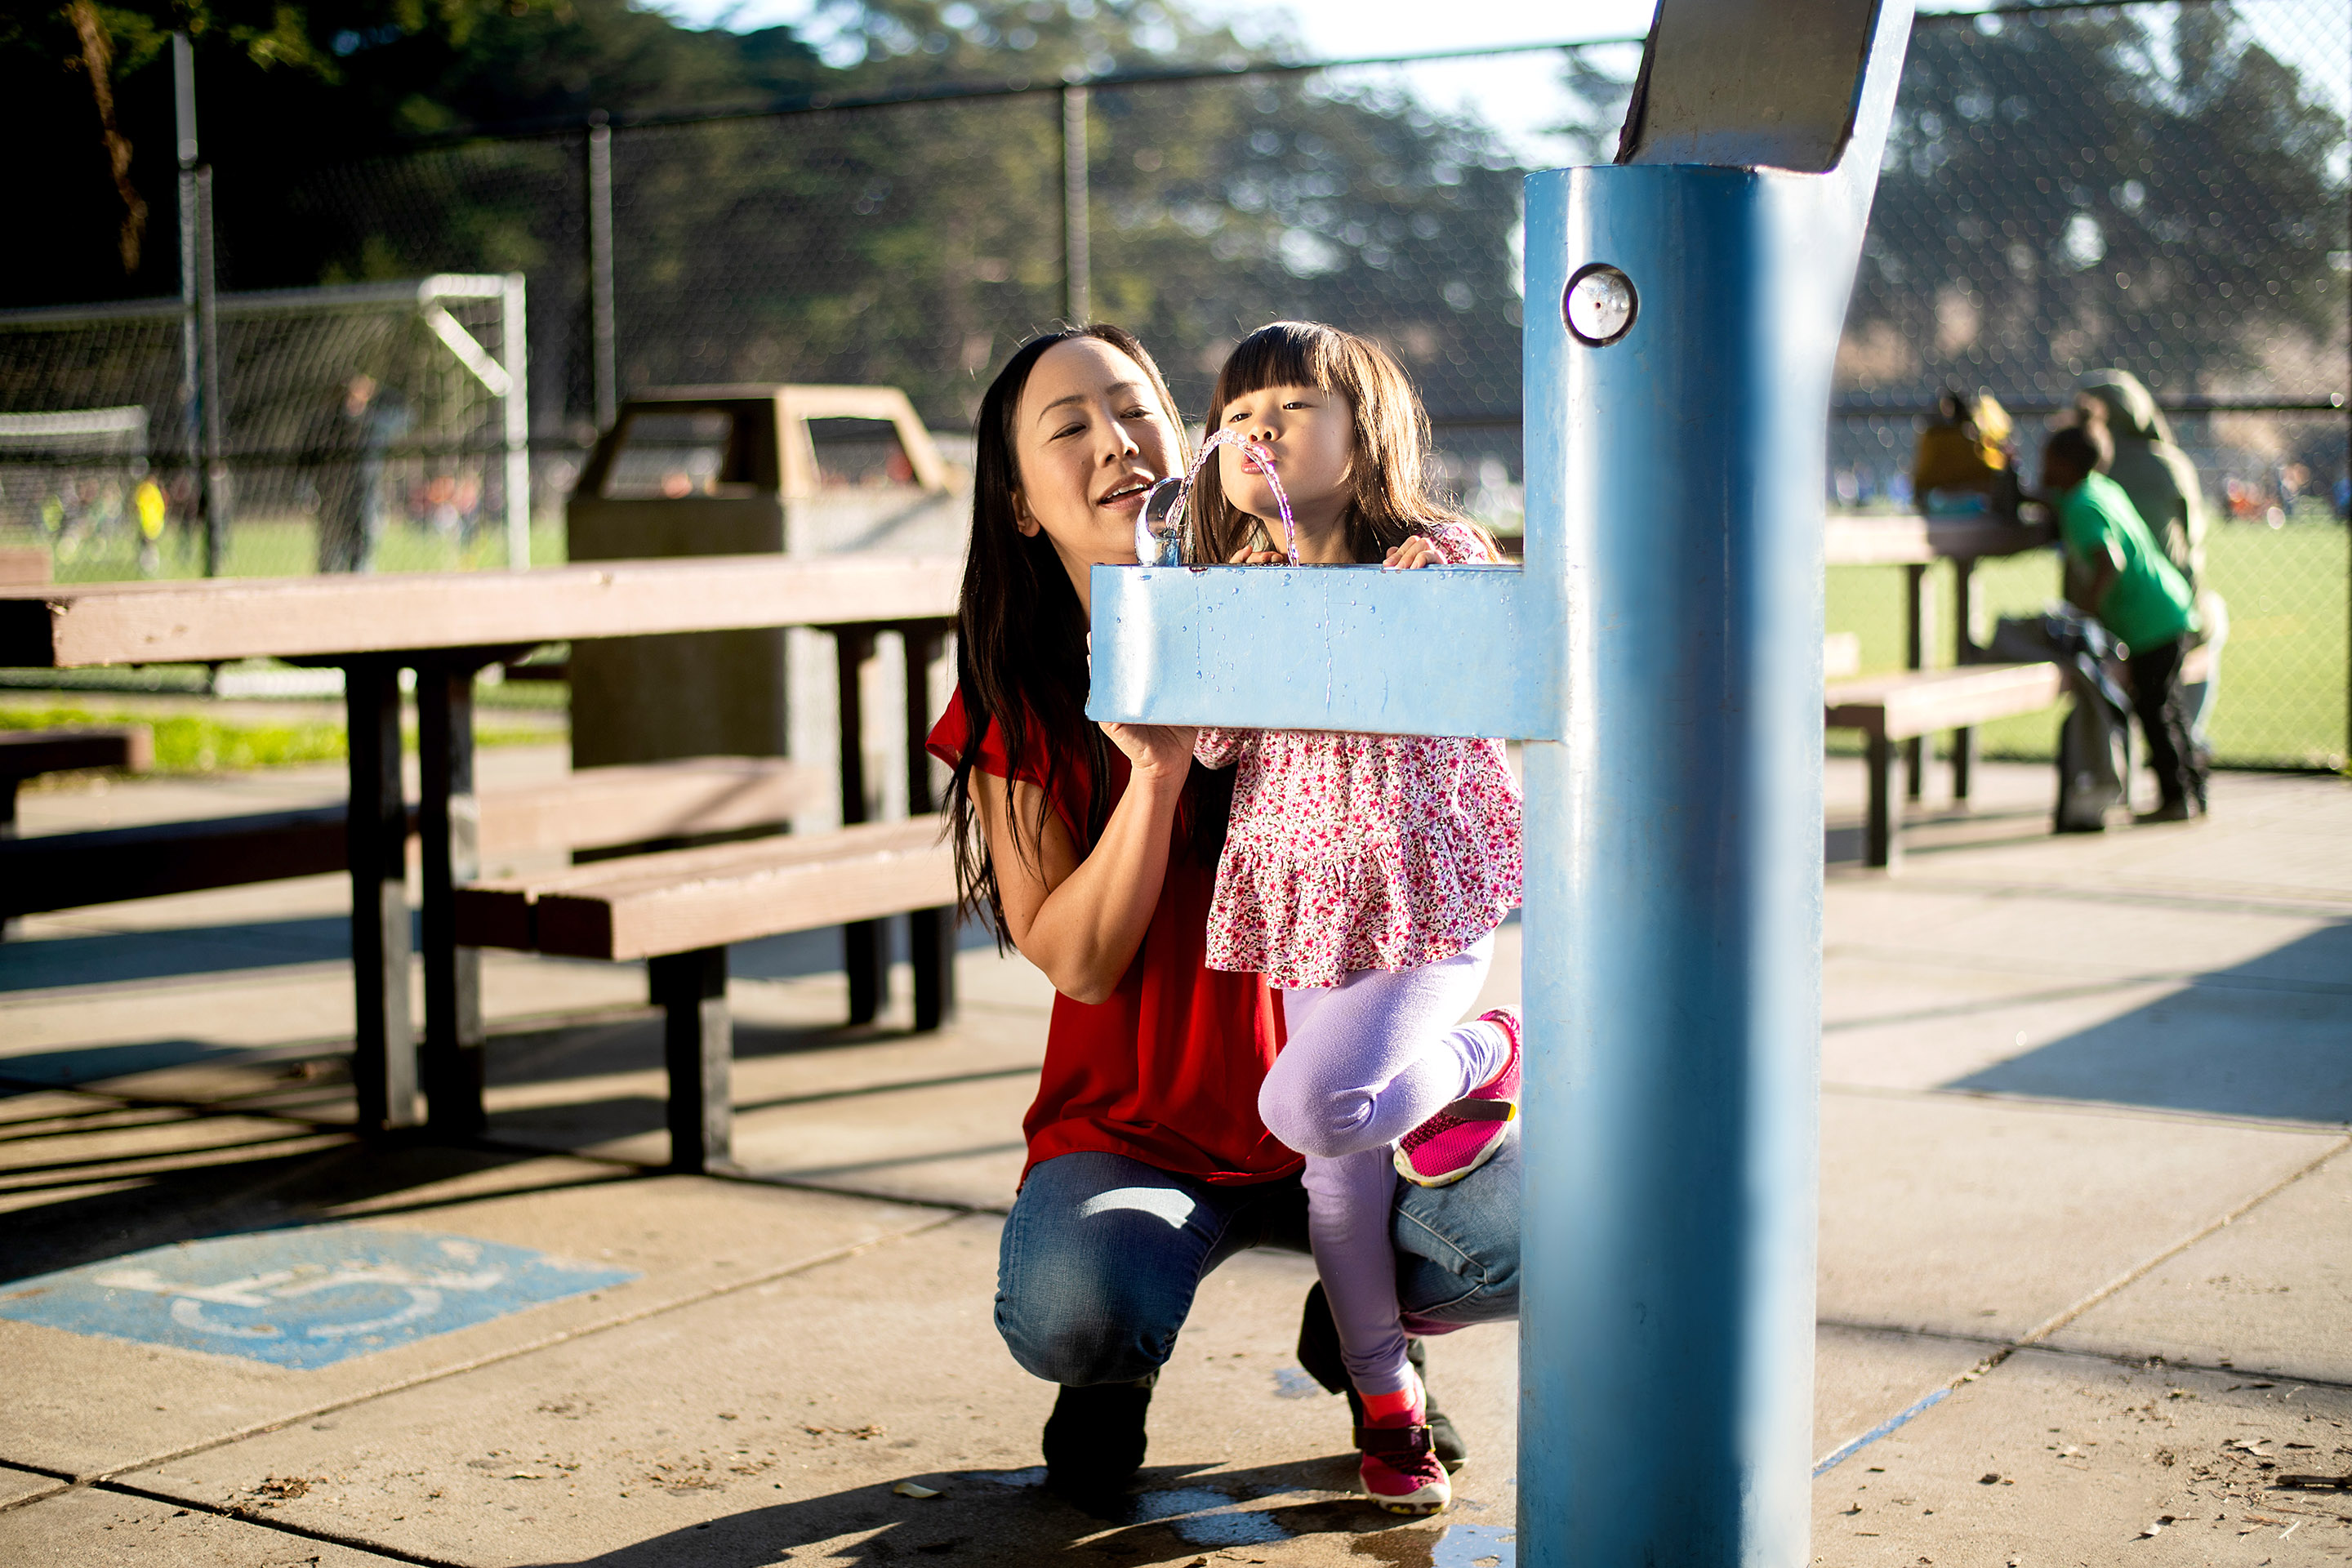 Water Stations Fight Obesity by Curbing San Francisco's Thirst for Sugary Sodas - UCSF News Services